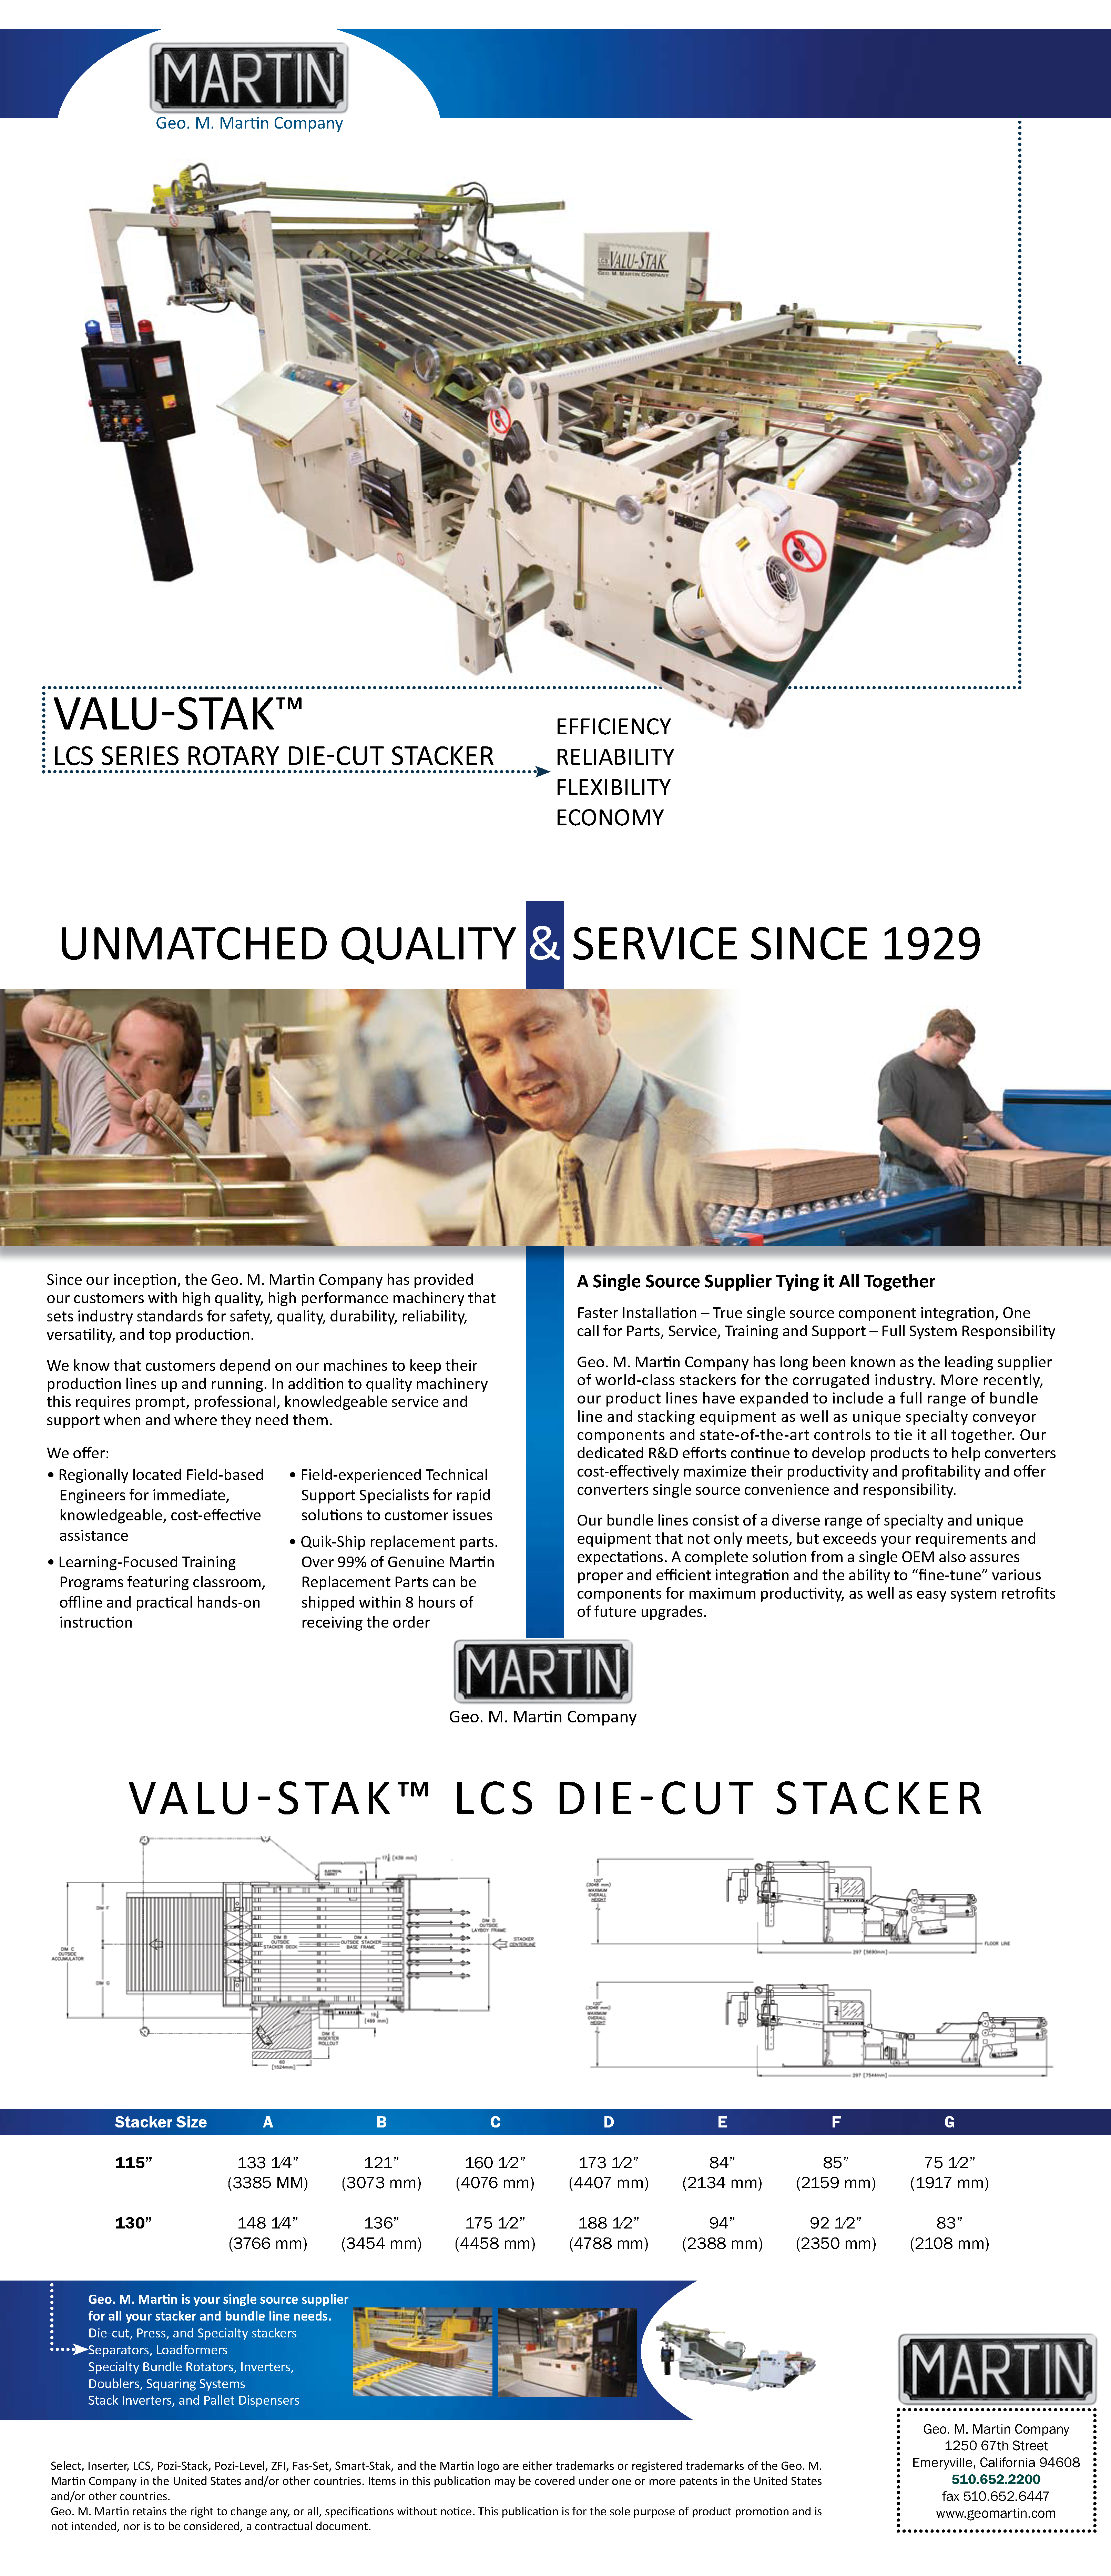 Learn more about the Valu-Stak LCS Rotary Die Cutter Stacker in the Geo. M. Martin brochure! 